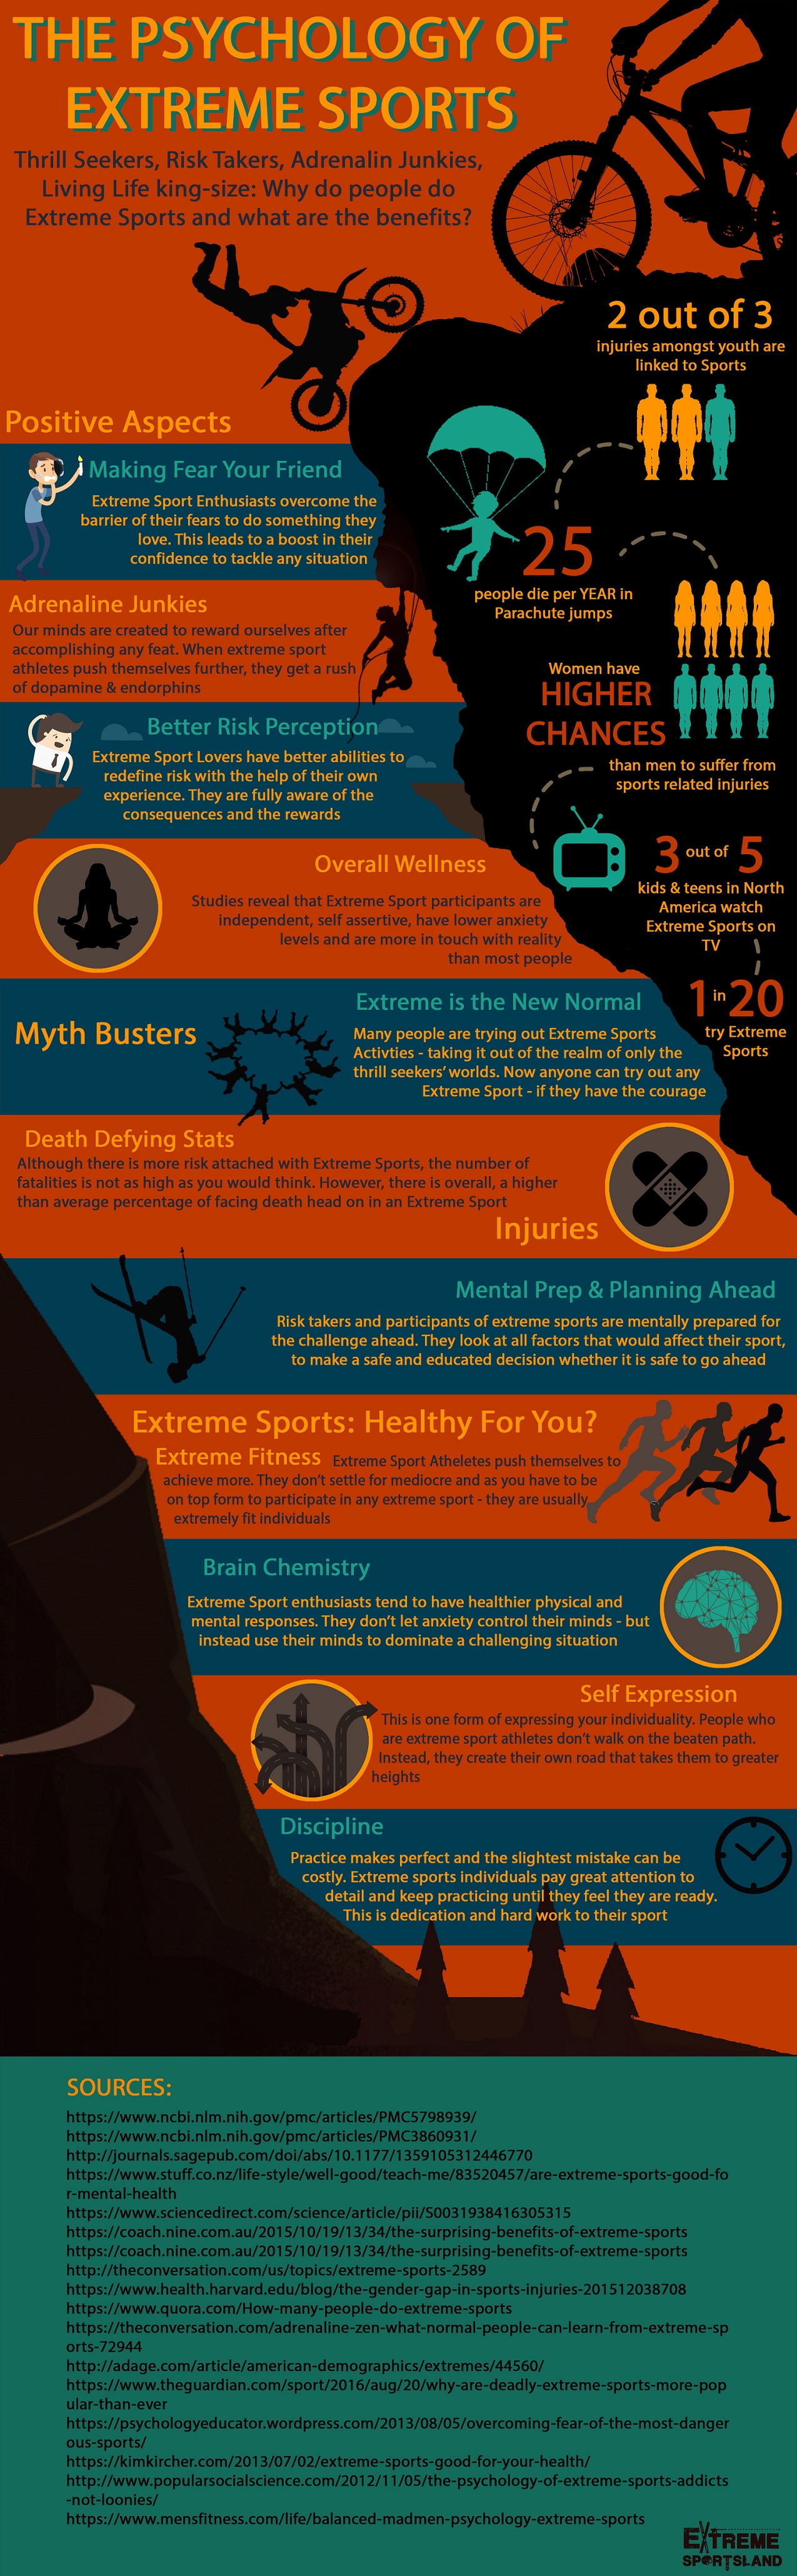 extreme sports psychology infographic